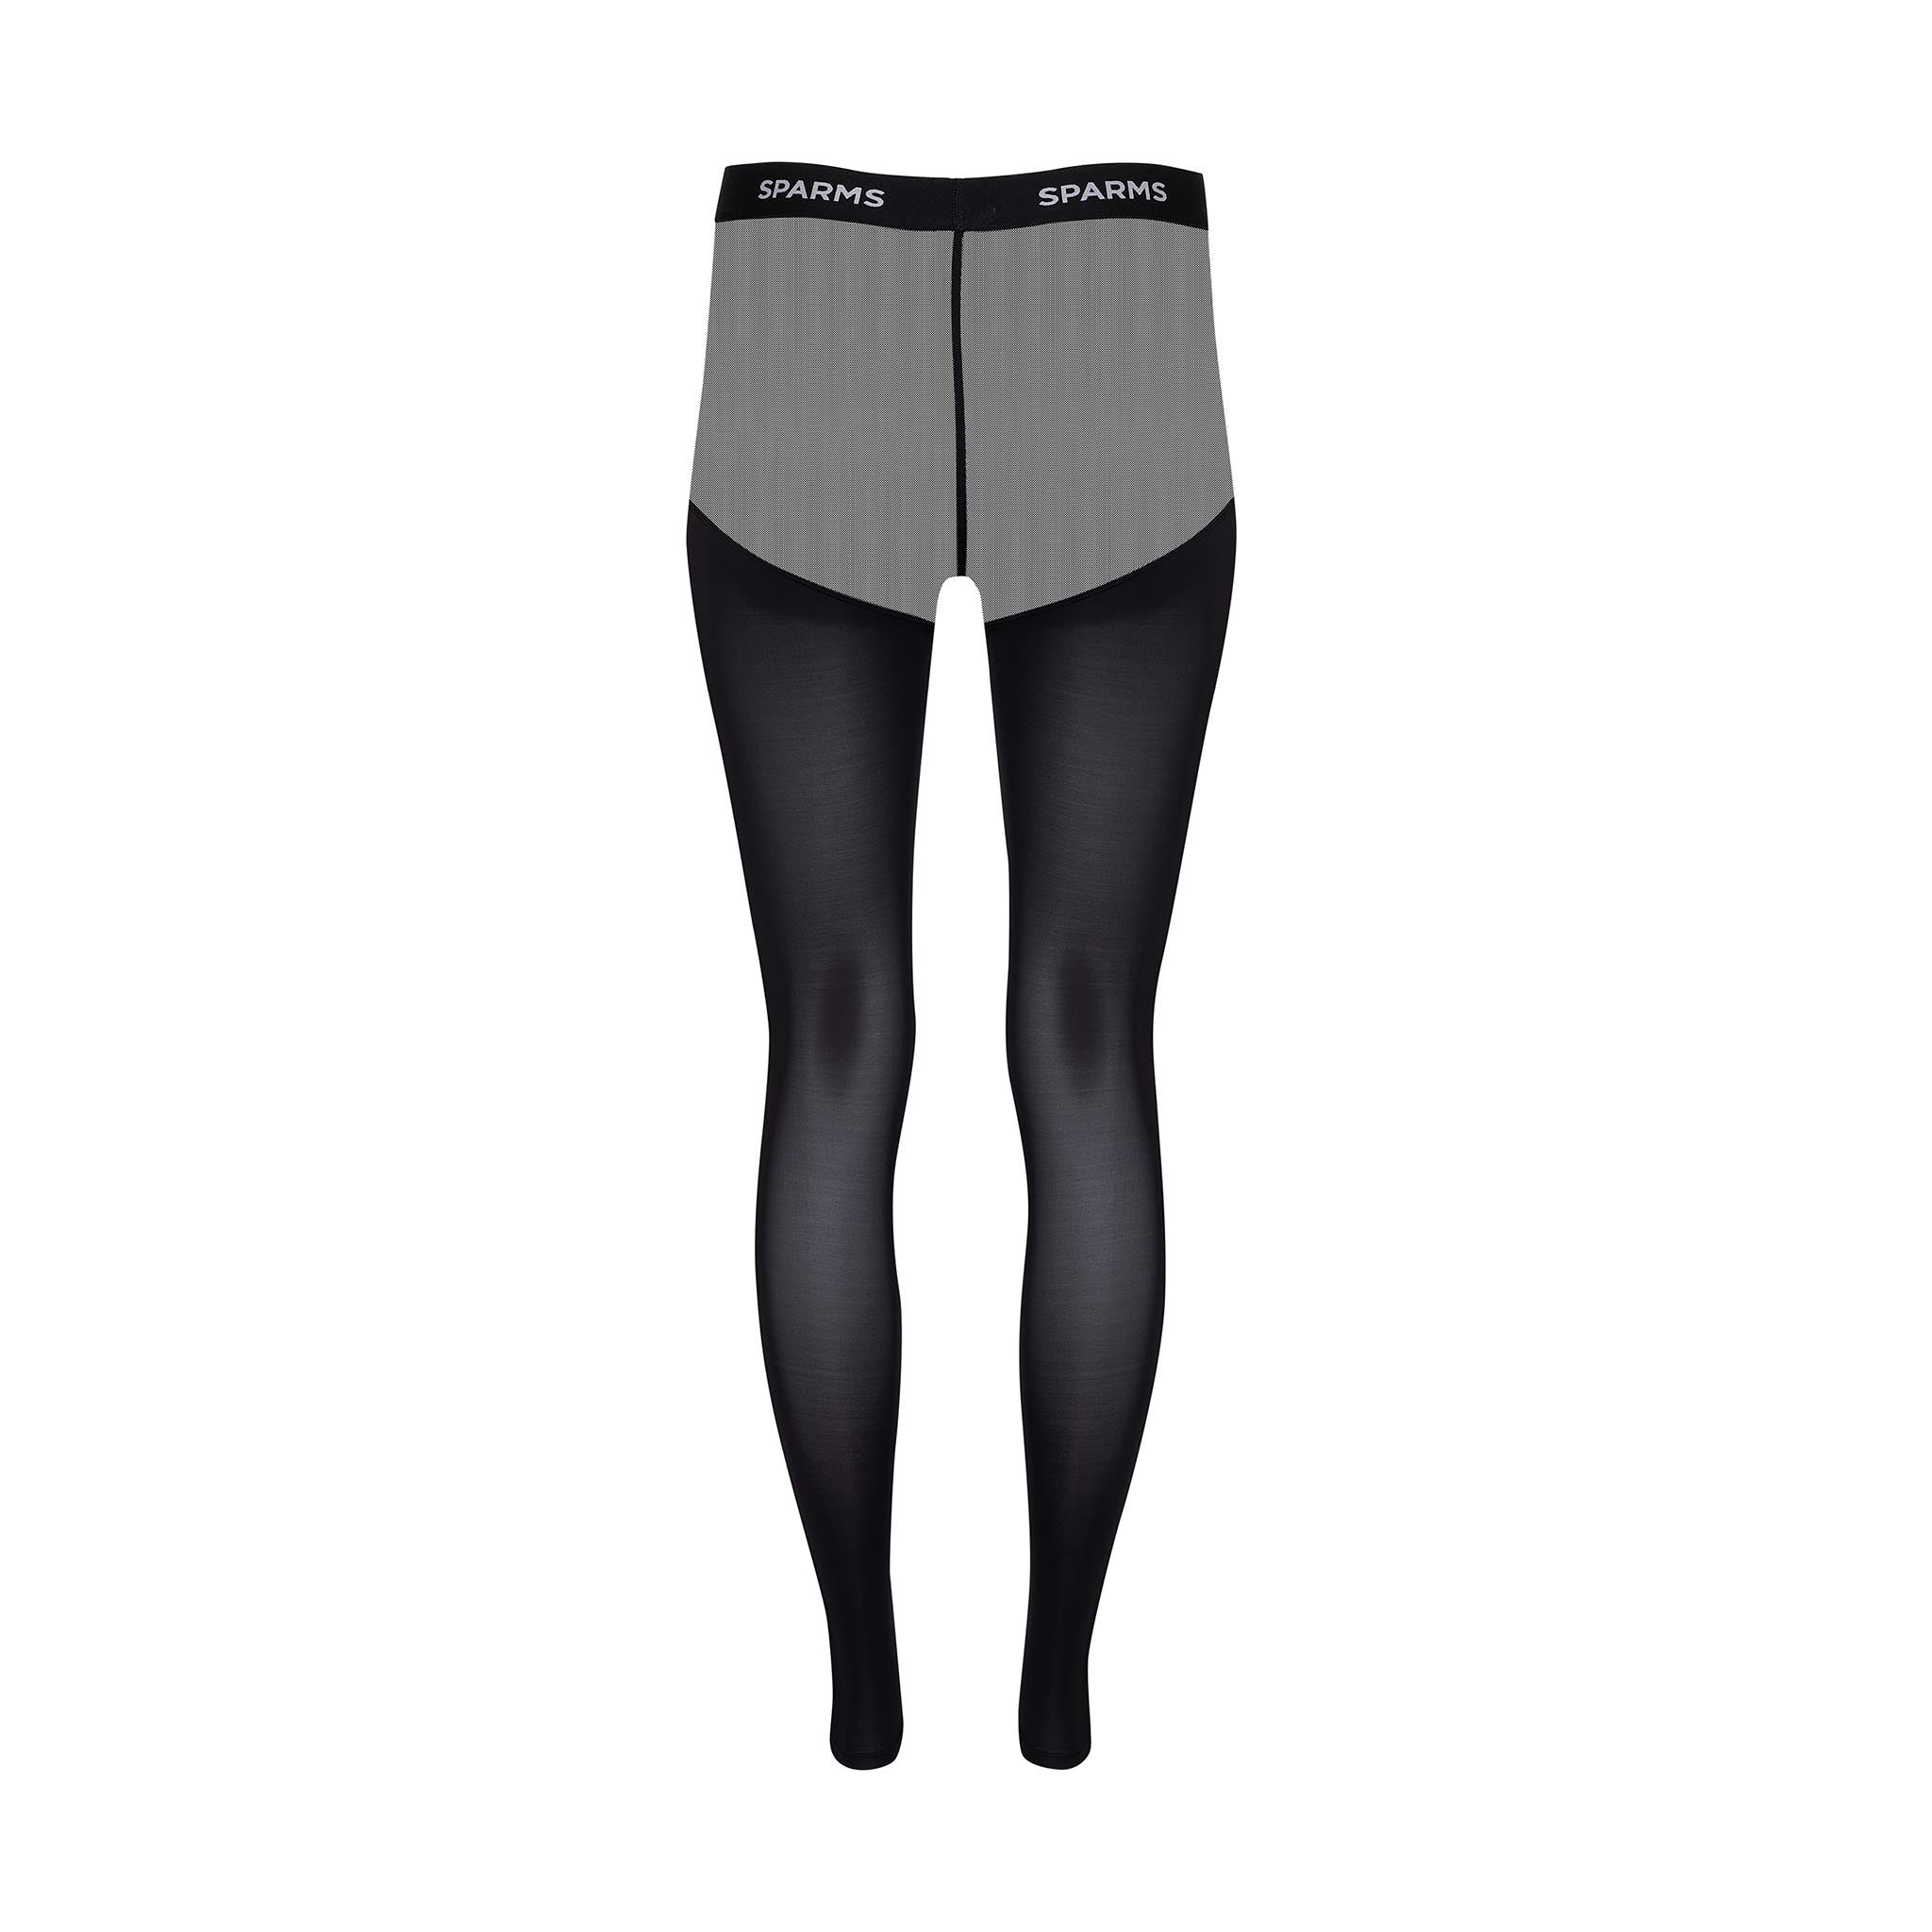 Thigh Protection Tights